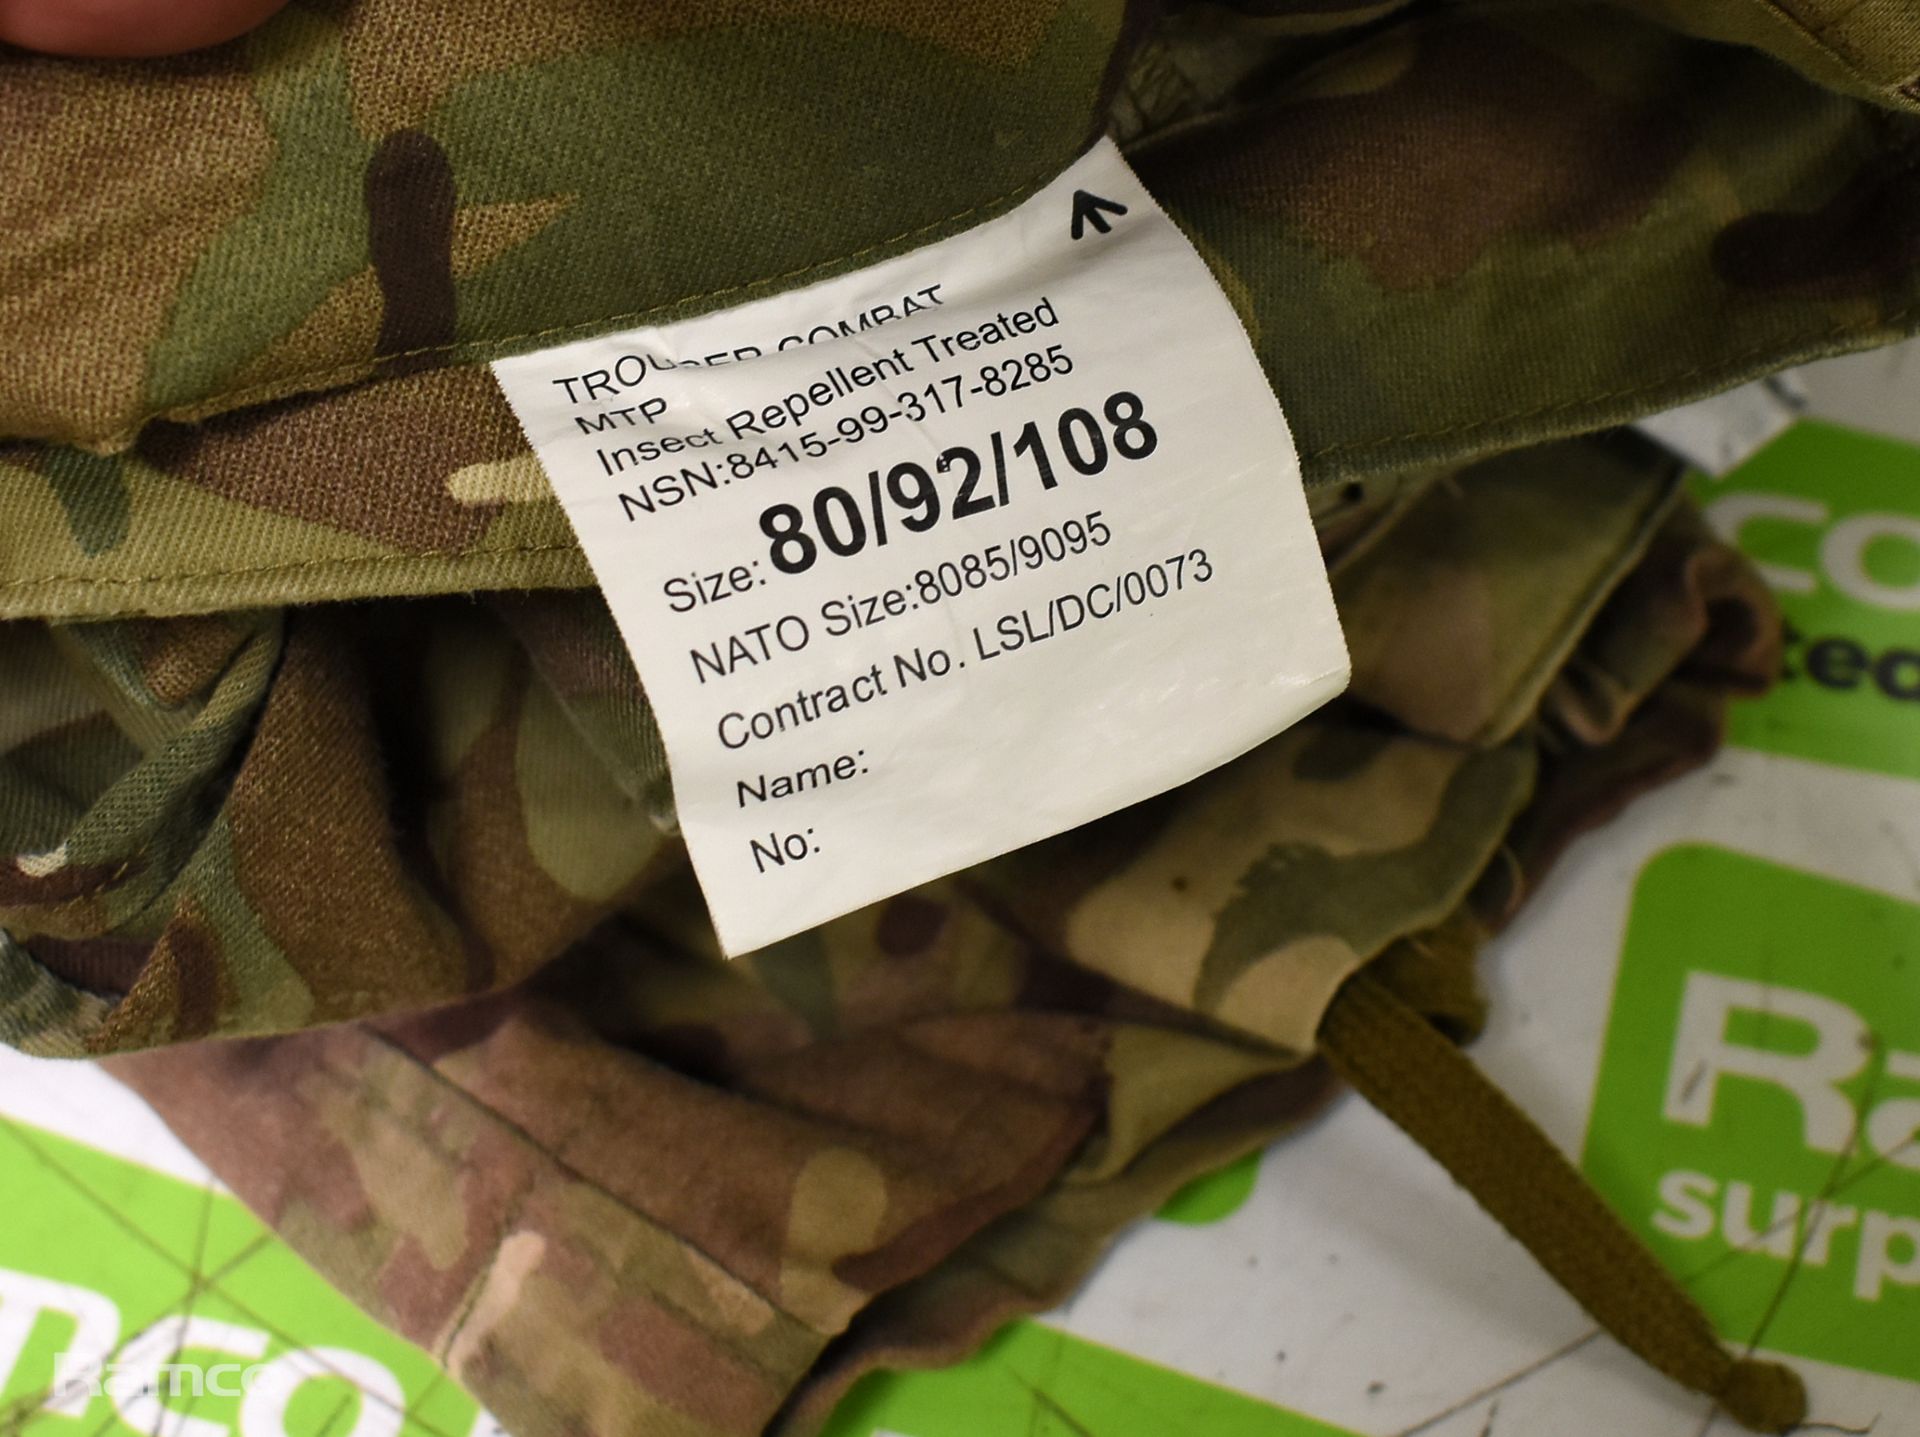 130x British Army MTP combat trousers - mixed grades and sizes - Image 10 of 15